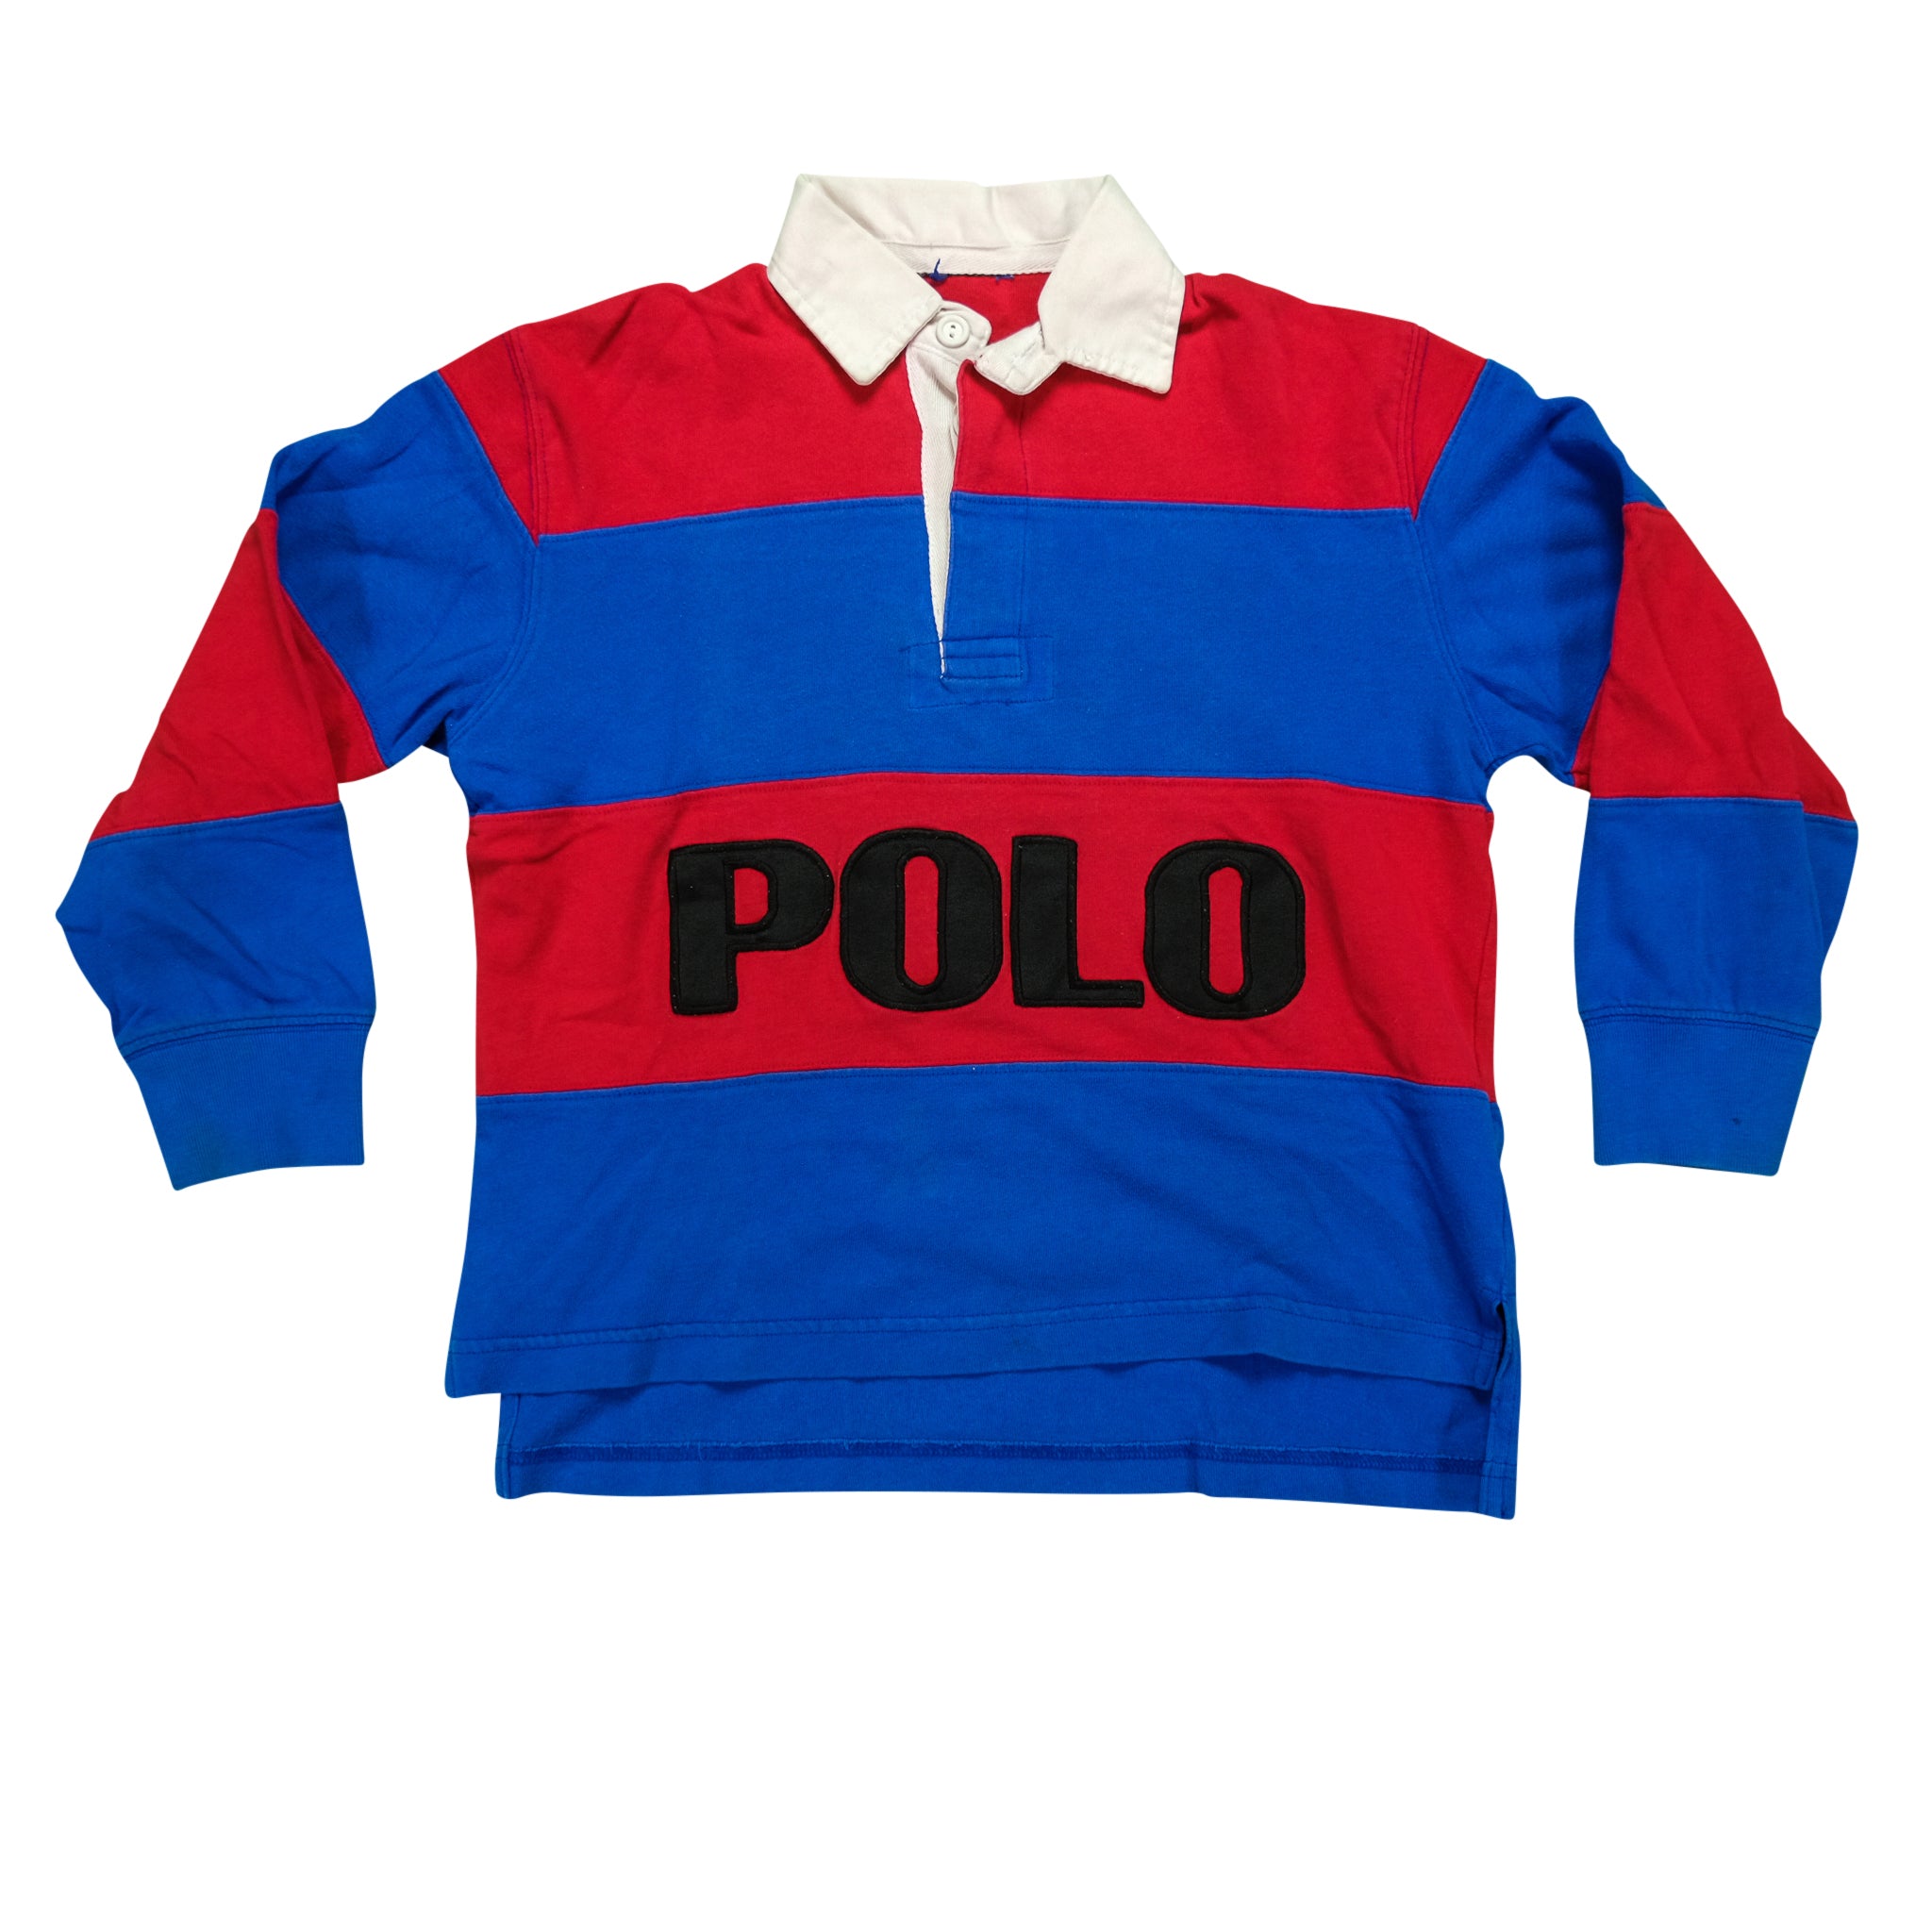 Vintage Ralph Lauren Polo Sport Polo Rugby Shirt